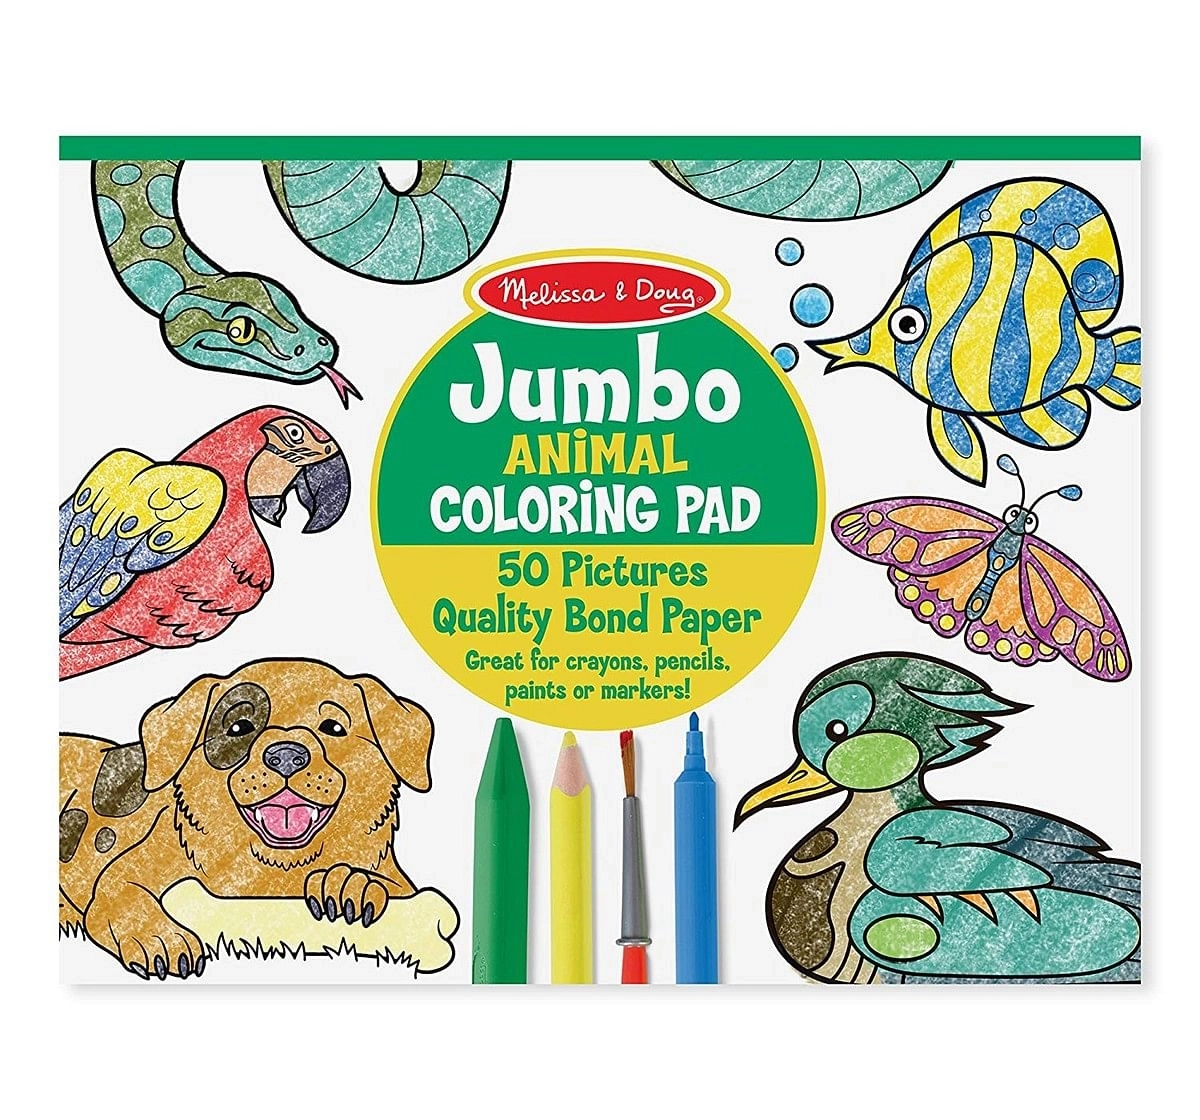 Melissa & Doug Jumbo Coloring Pad - Animals (50 Pictures, 11 X 14 Inches) DIY Art & Craft Kits for Kids age 3Y+ 